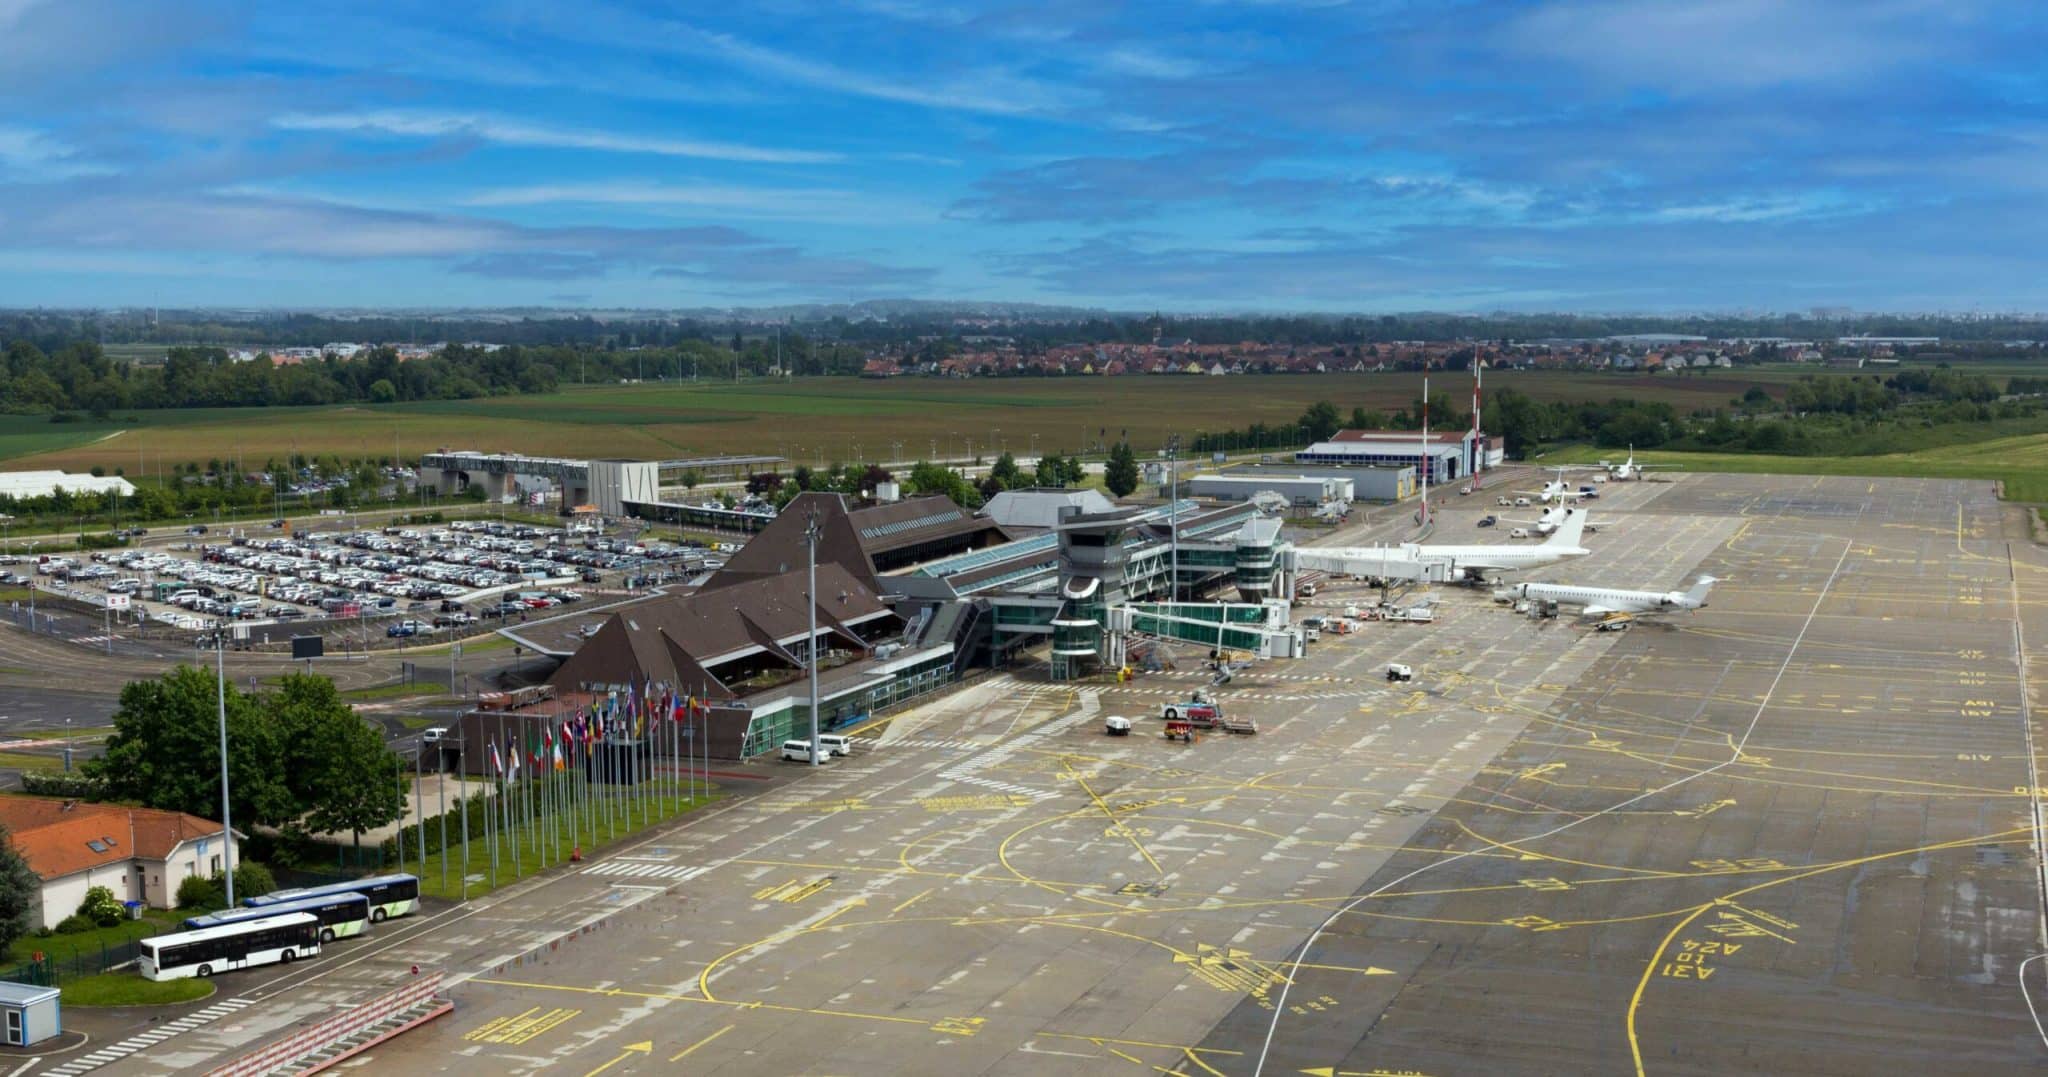 Strasbourg Airport closed from 14 March to 14 April for runway renovation